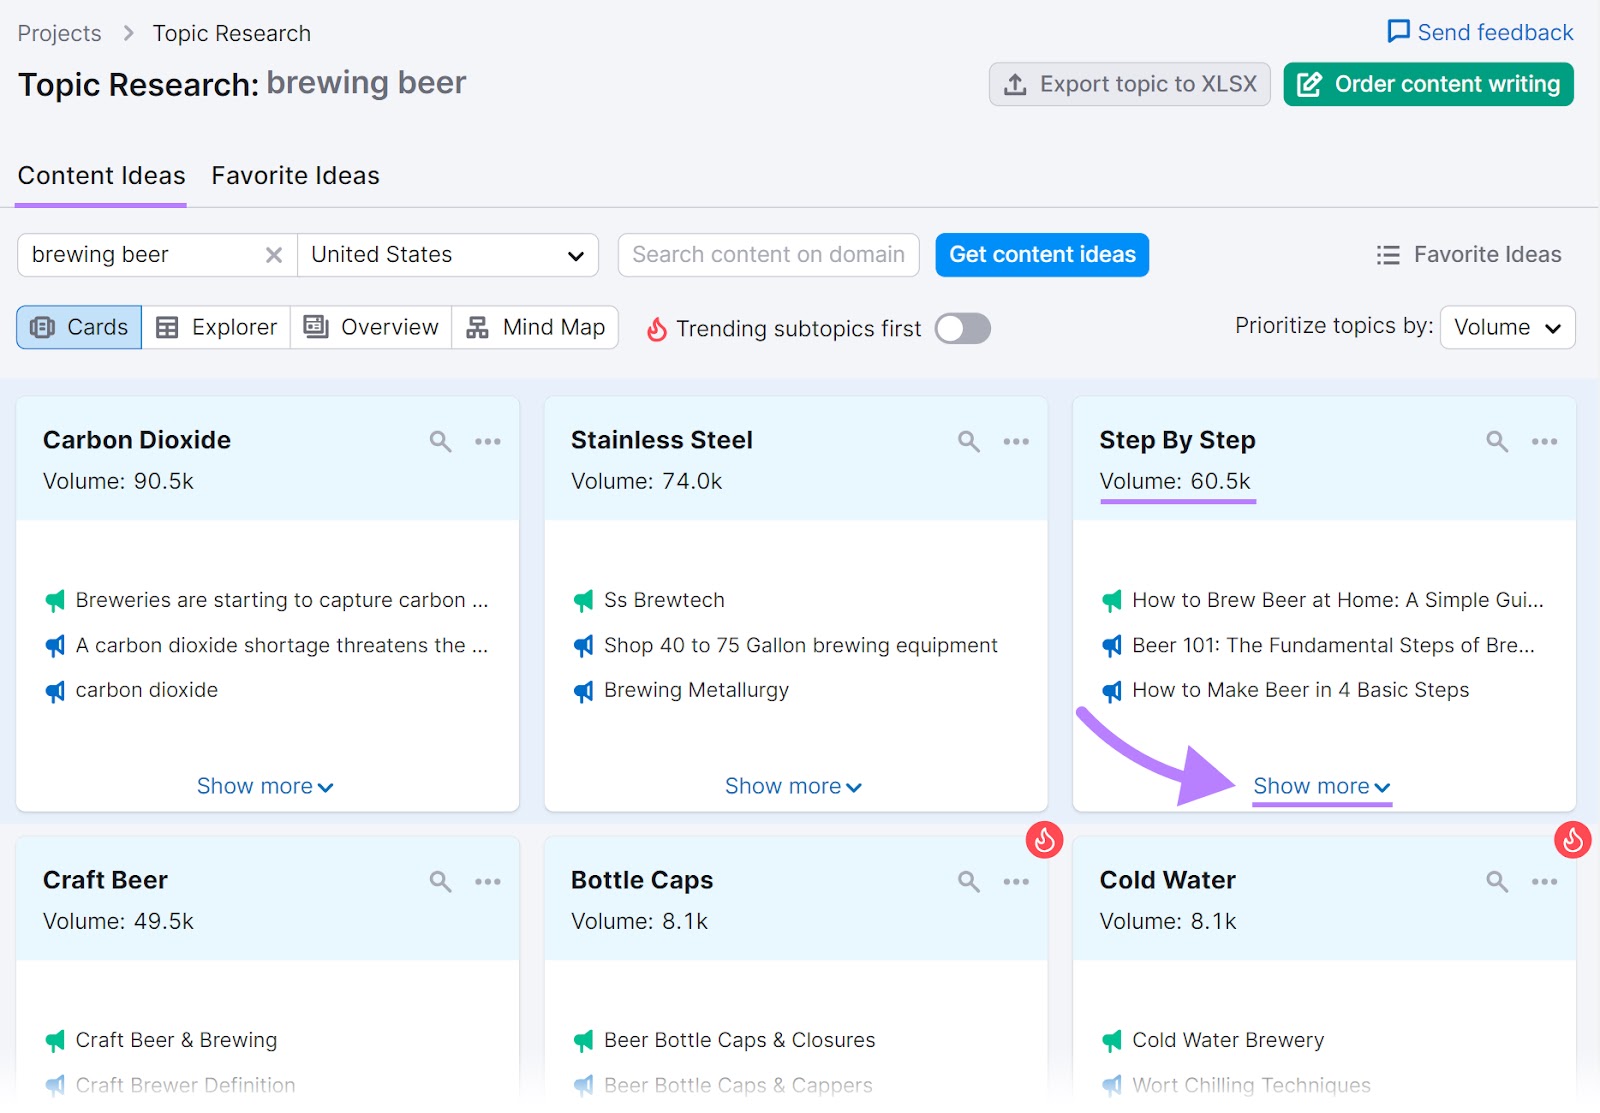 "Content Ideas" dashboard for "brewing beer" in Topic Research tool